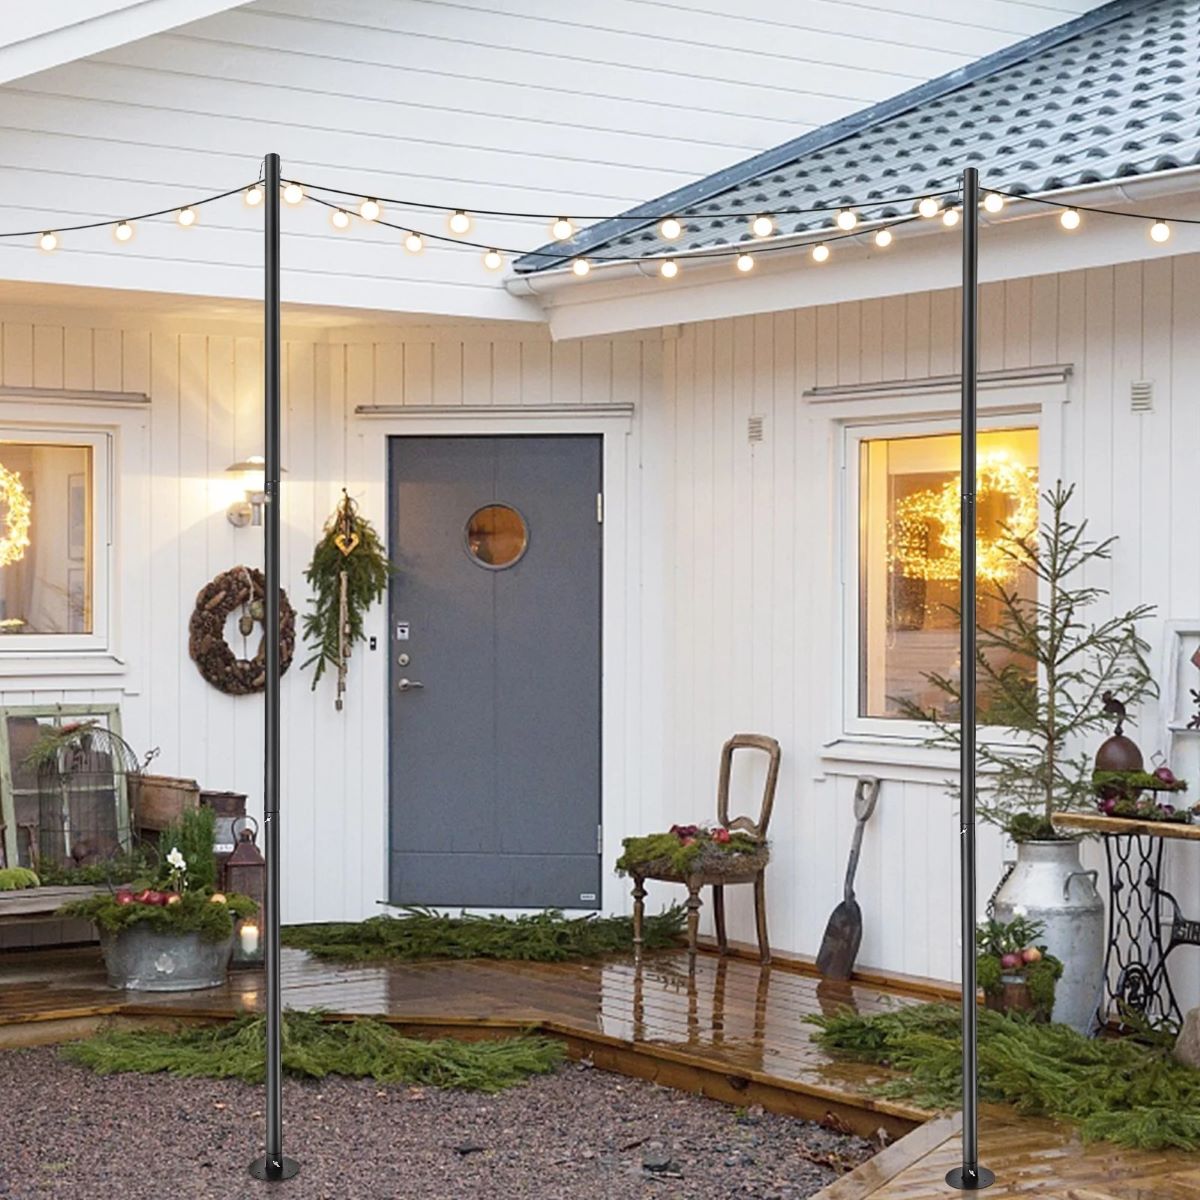 How To Install String Light Poles In Your Backyard